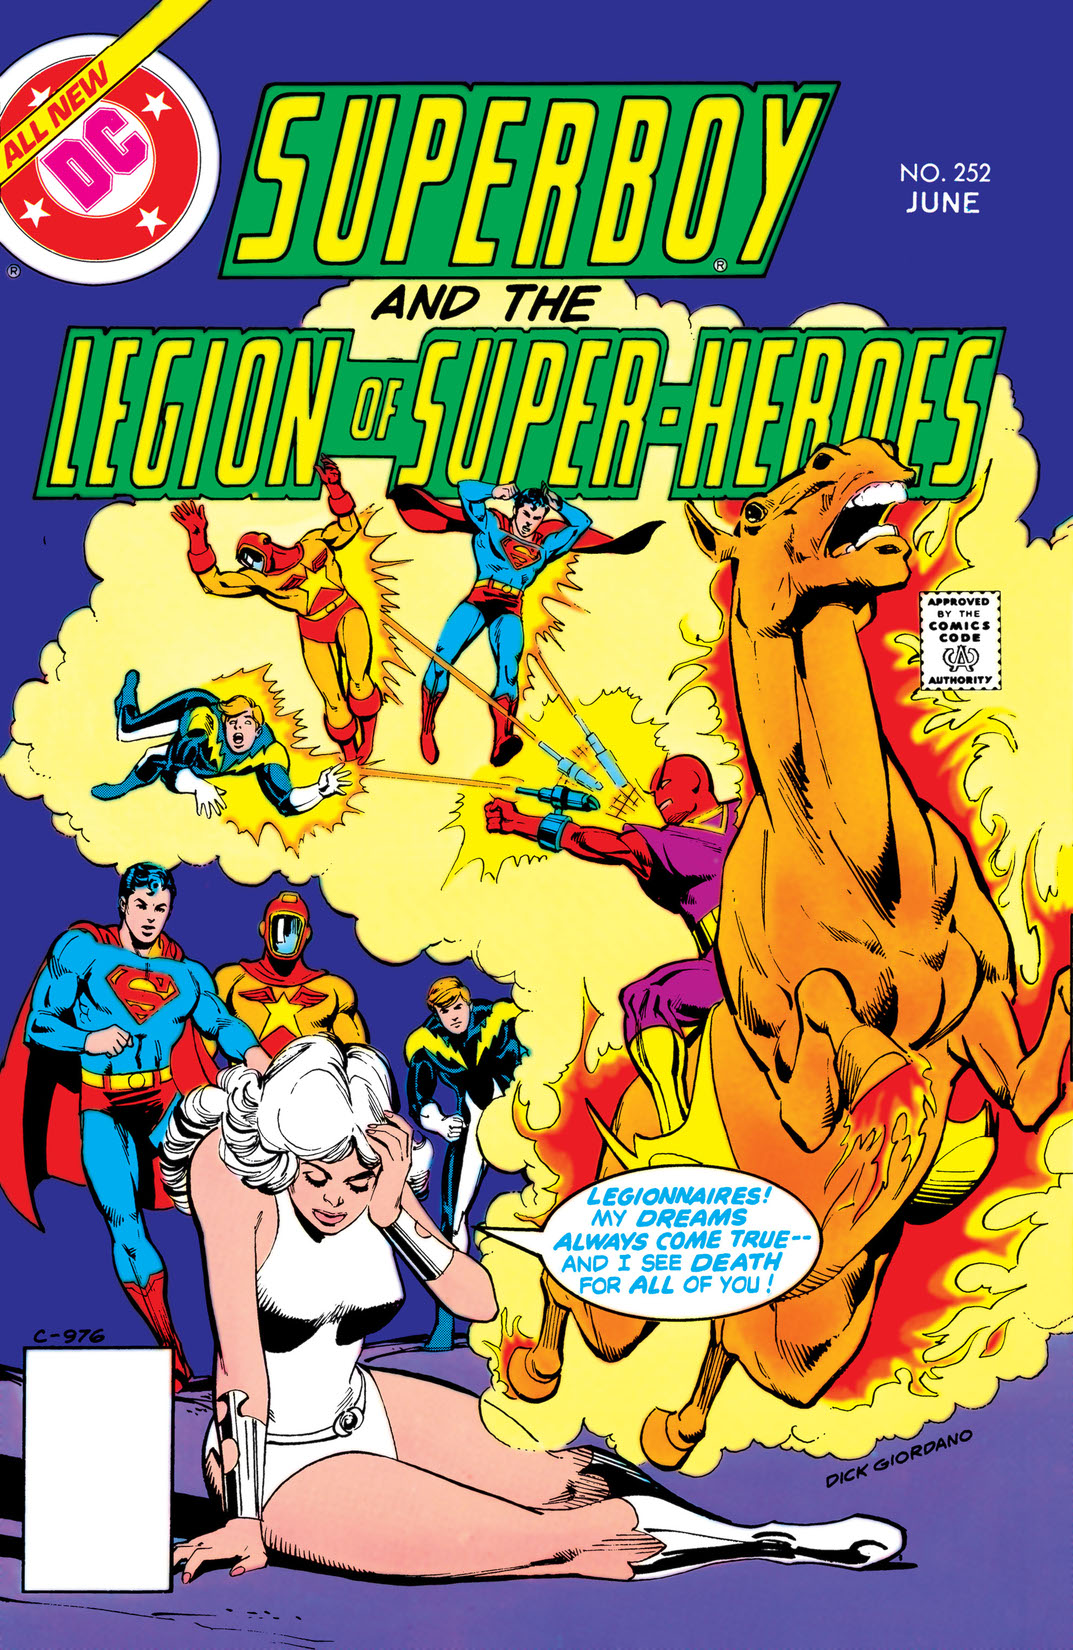 Superboy and the Legion of Super-Heroes (1977-) #252 preview images